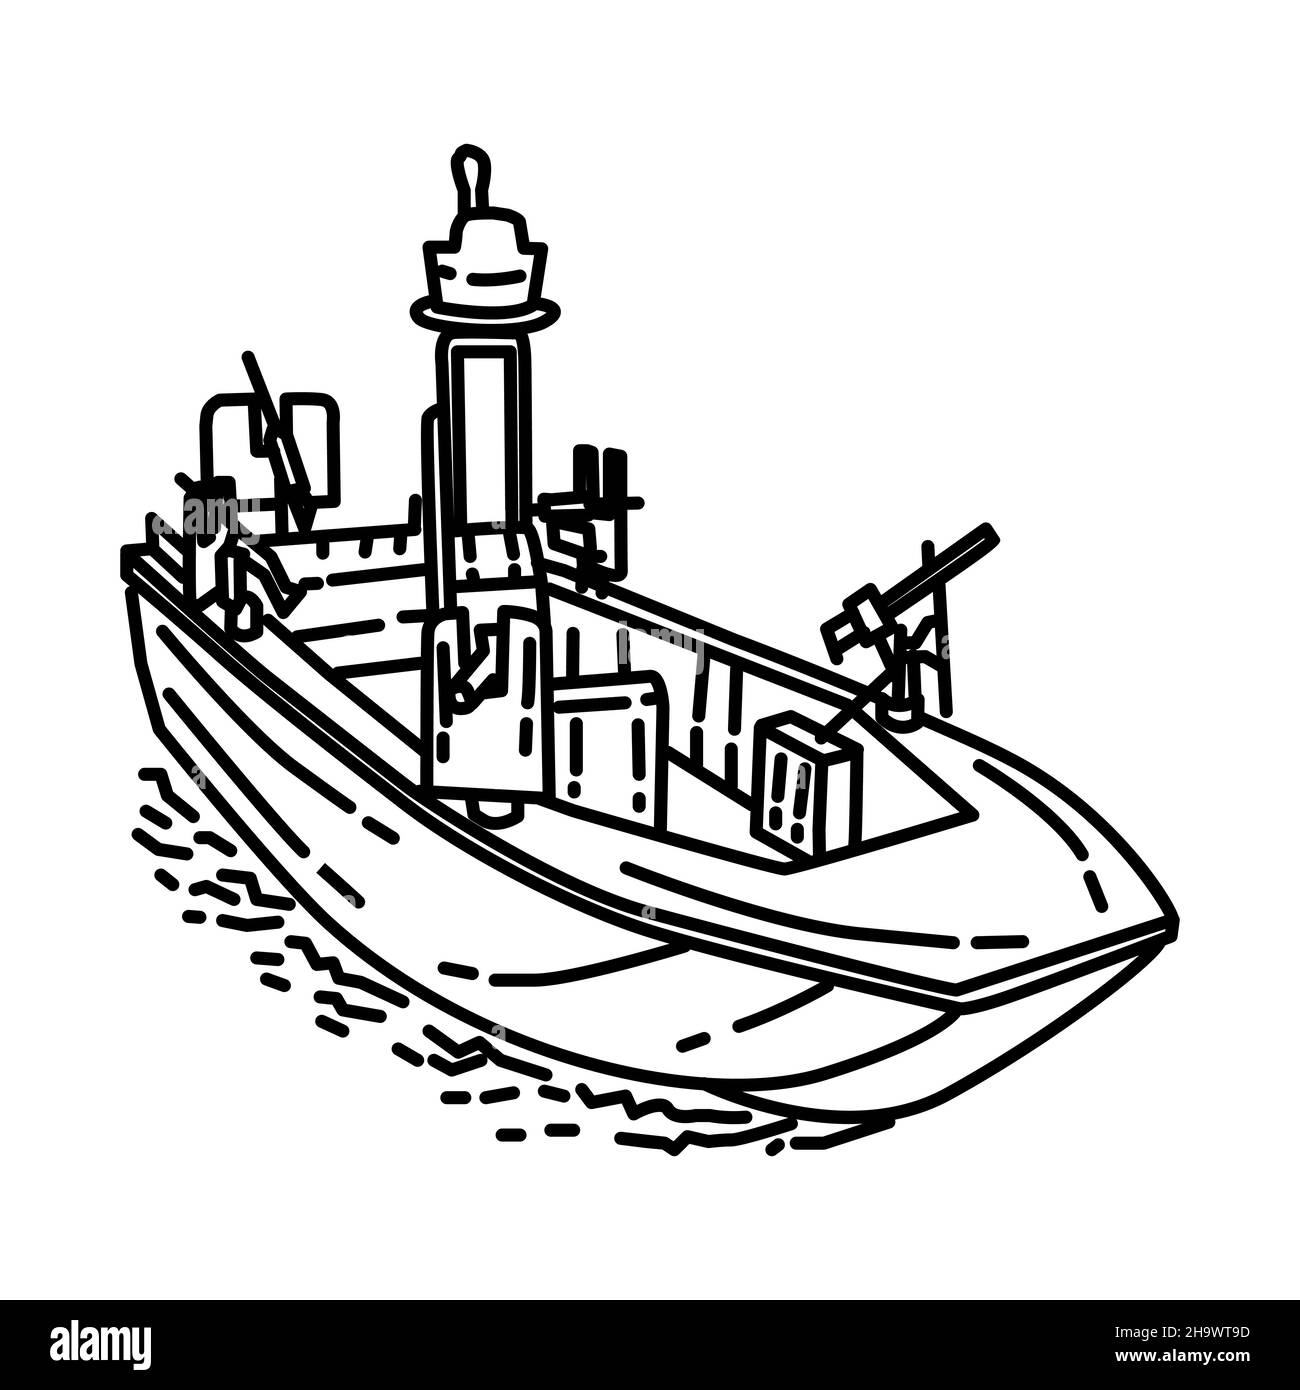 Marine Special Operations Craft - Riverine Part of Military and Marine Corps Equipments Hand Drawn Icon Set Vector Stock Vector